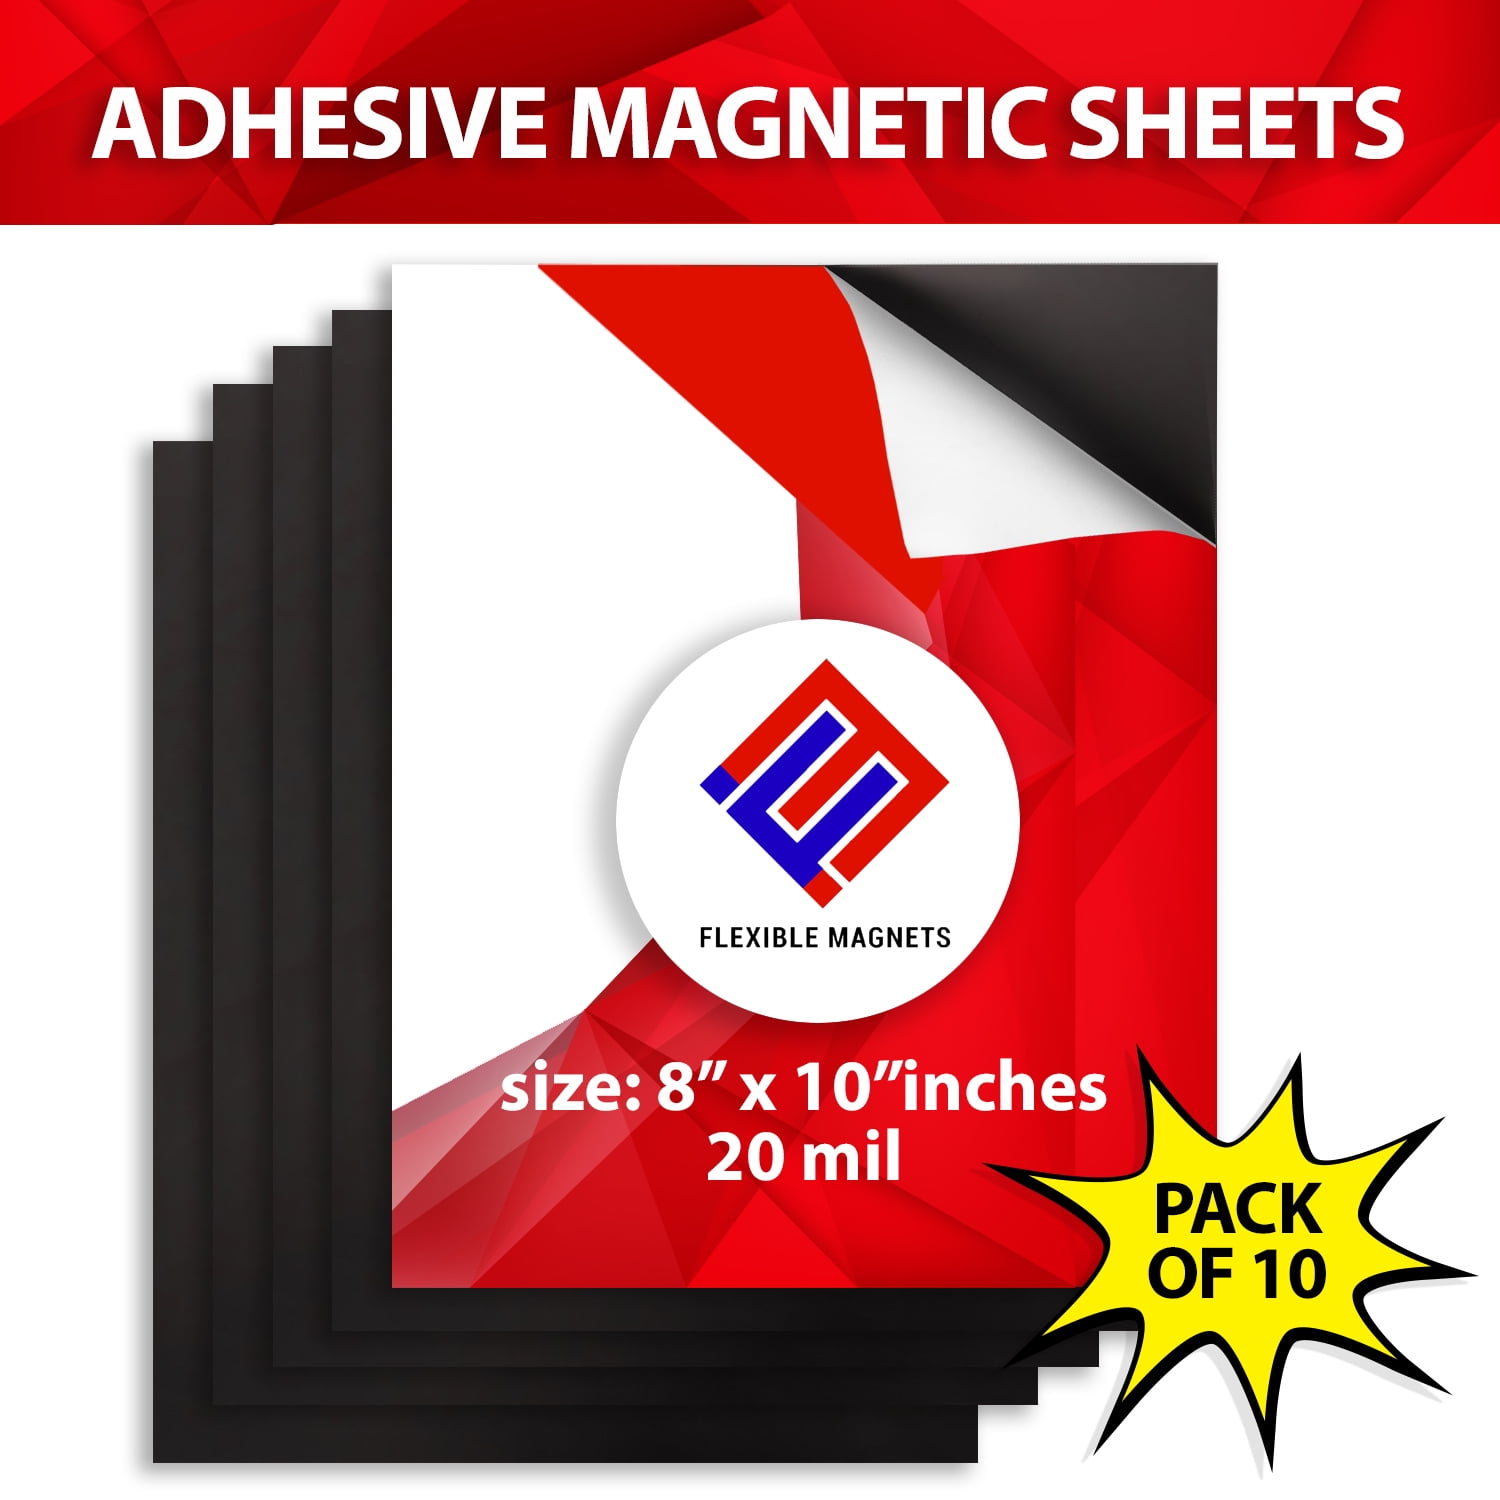 Marietta Magnetics - 25 Magnetic Sheets of 5 x 7 Adhesive 20 mi   Review 